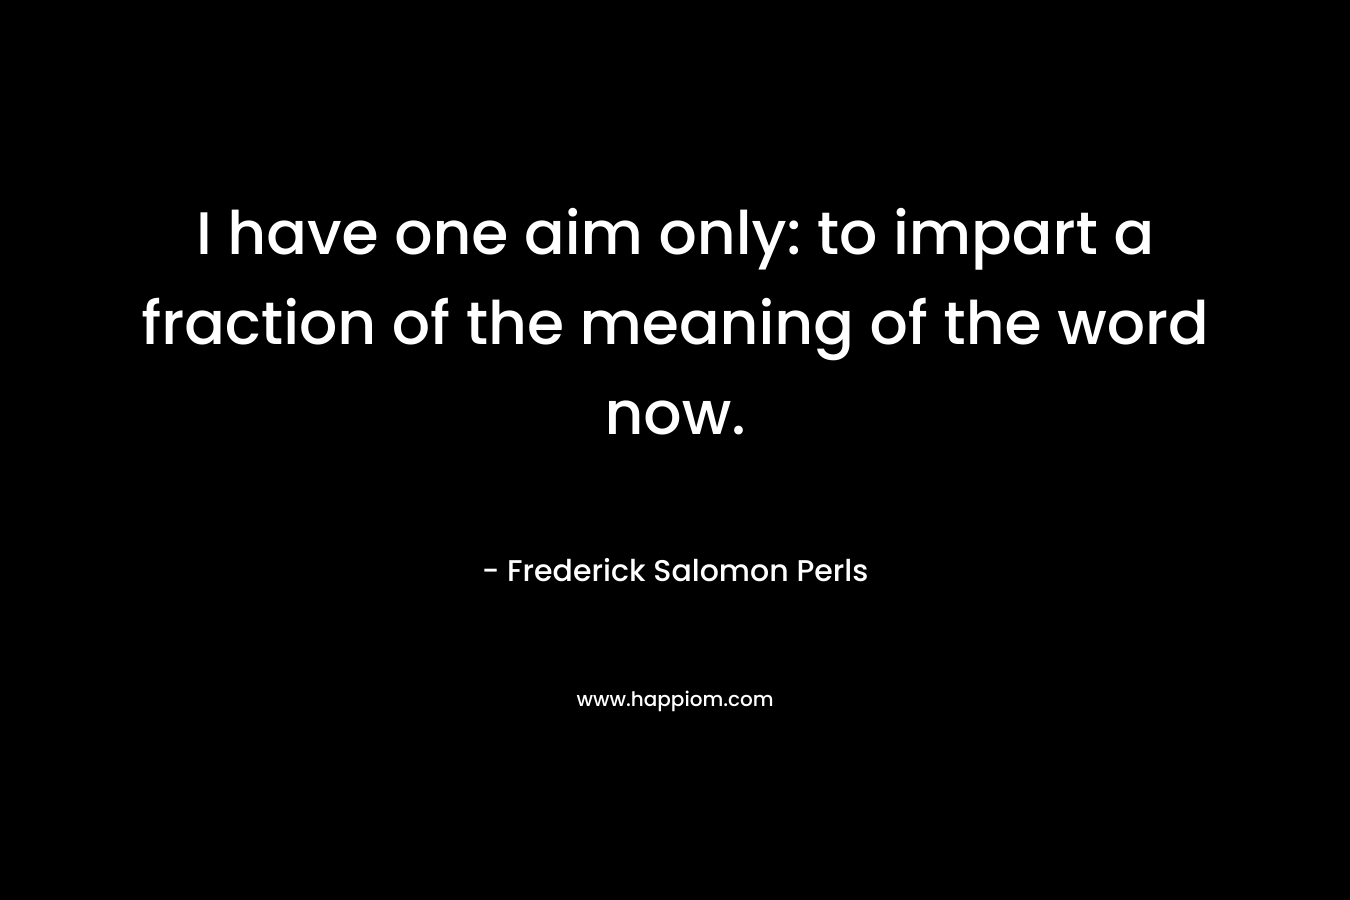 I have one aim only: to impart a fraction of the meaning of the word now. – Frederick Salomon Perls